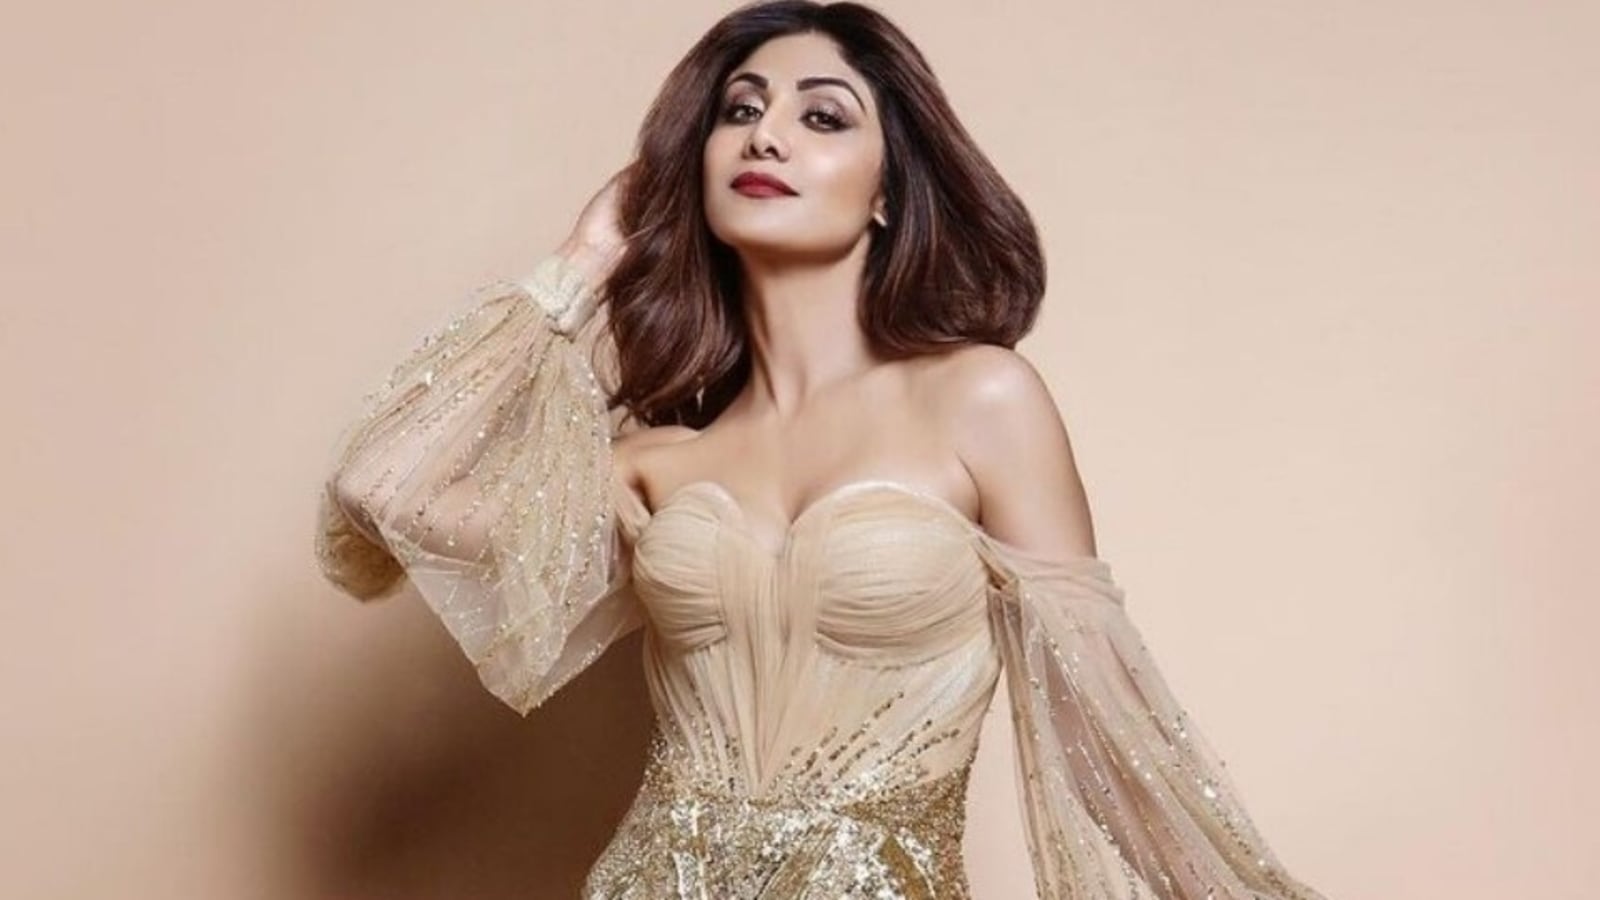 Sparkle on, darling: Shilpa Shetty in nude shimmery gown gives us a  retro-chic moment | Fashion Trends - Hindustan Times